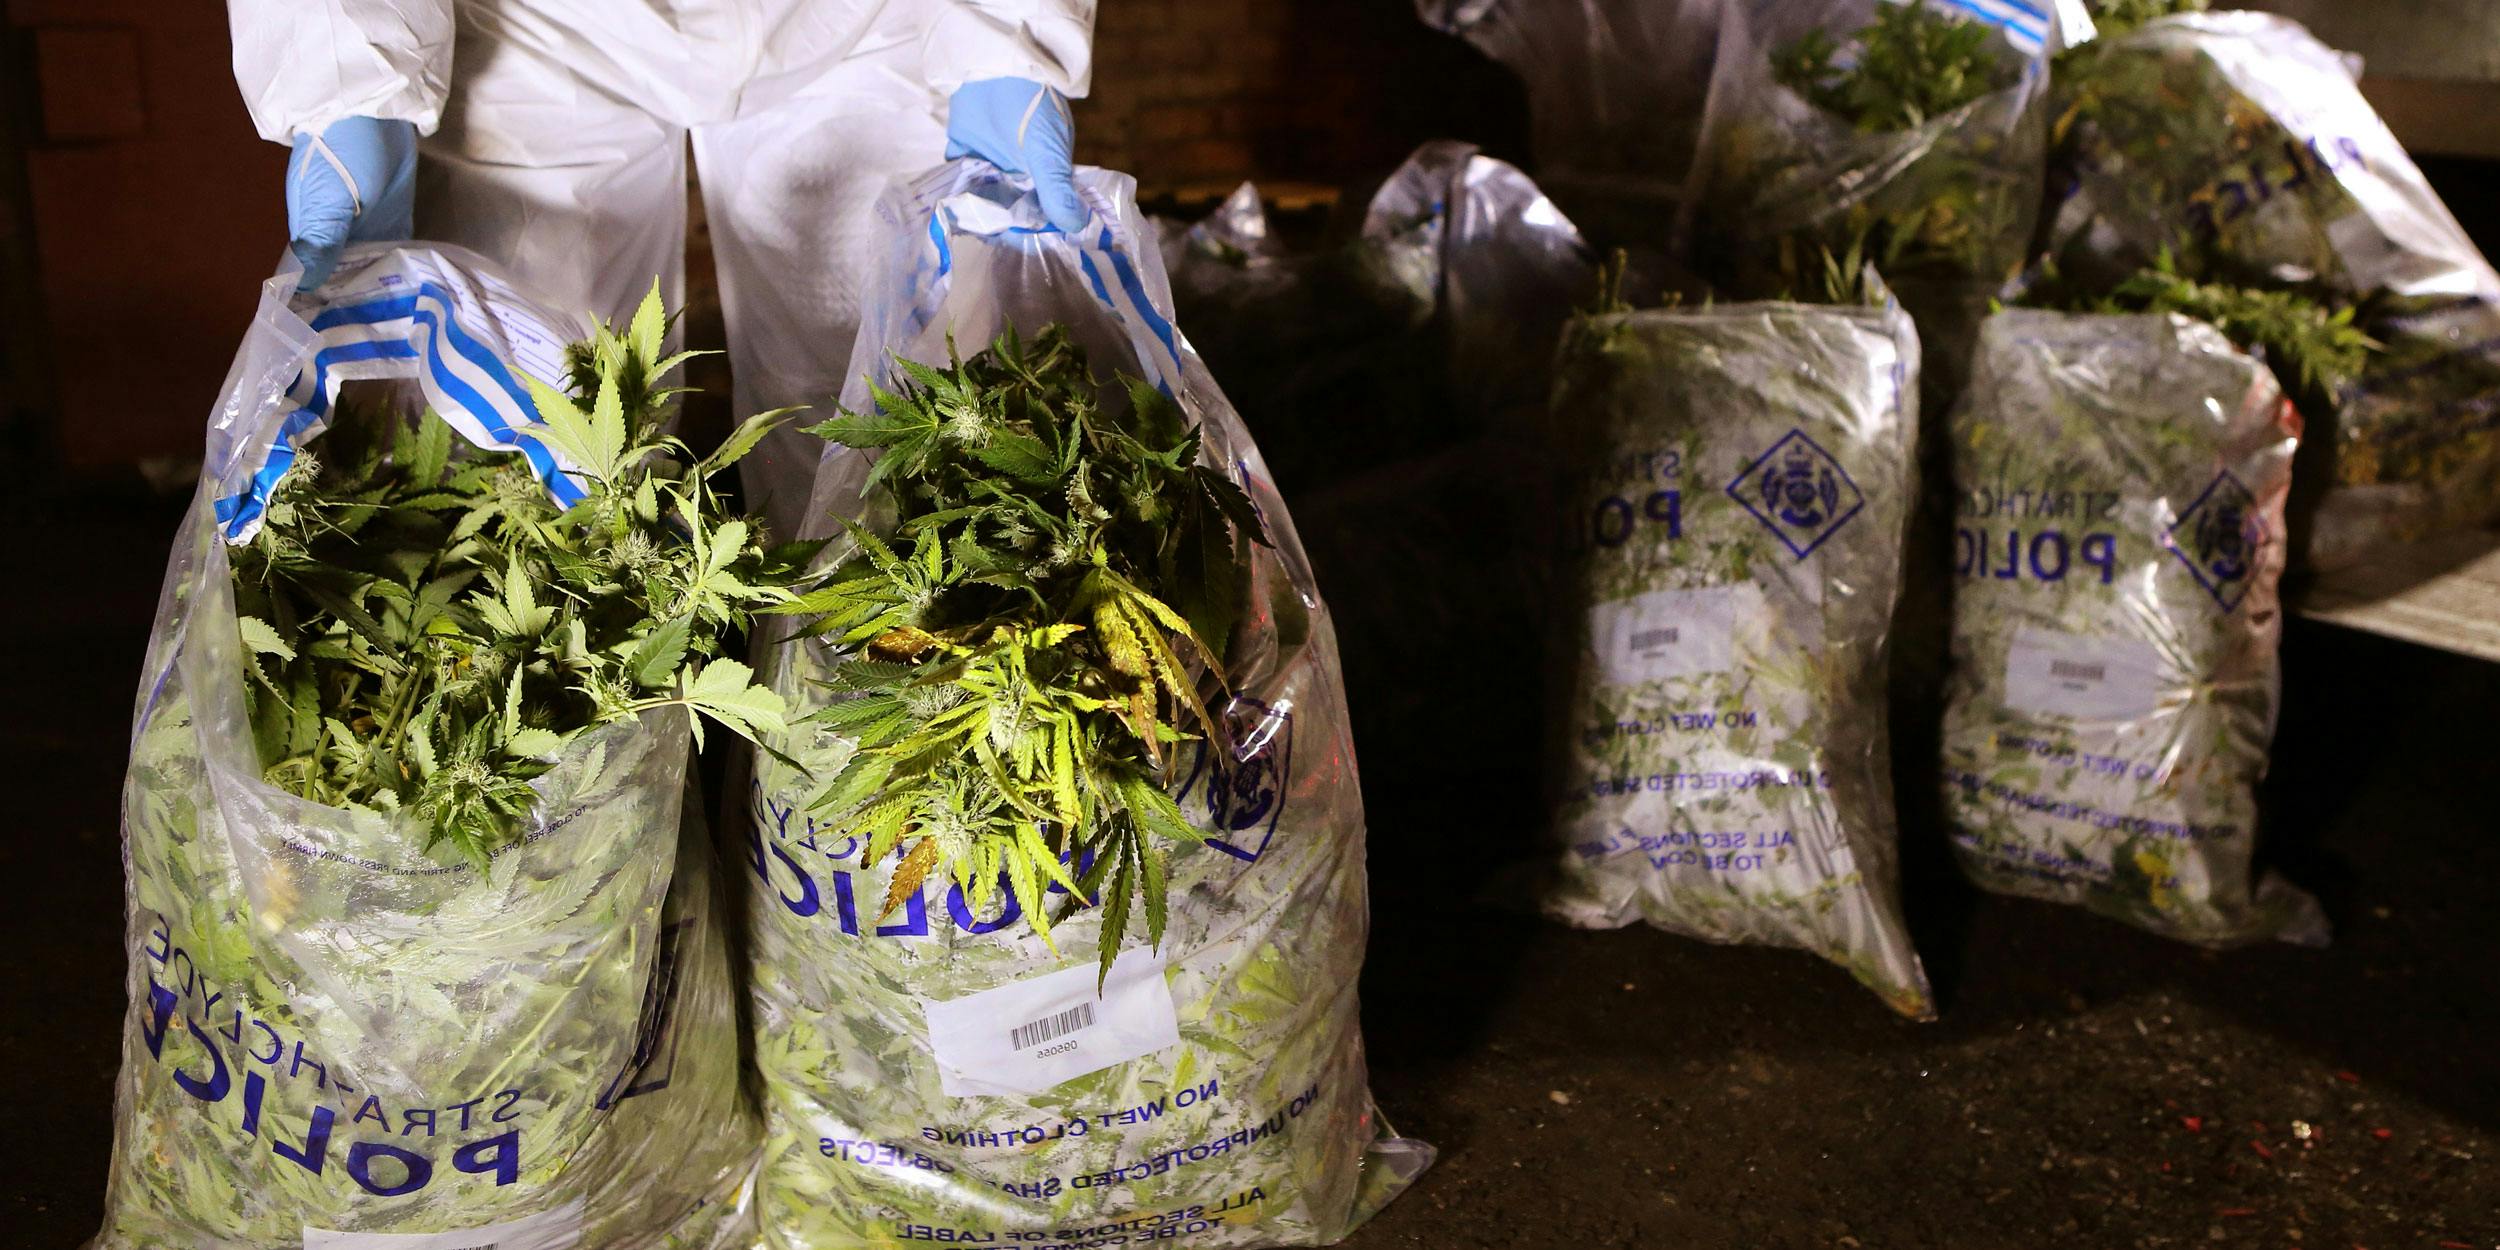 Strathclyde Police officers in Scotland load drugs in bags believed to be cannabis after it was found at a commercial premise in Rutherglen after a drugs raid. The police in London recently announced that they discover illegal cannabis grows in the UK's capital every two days.